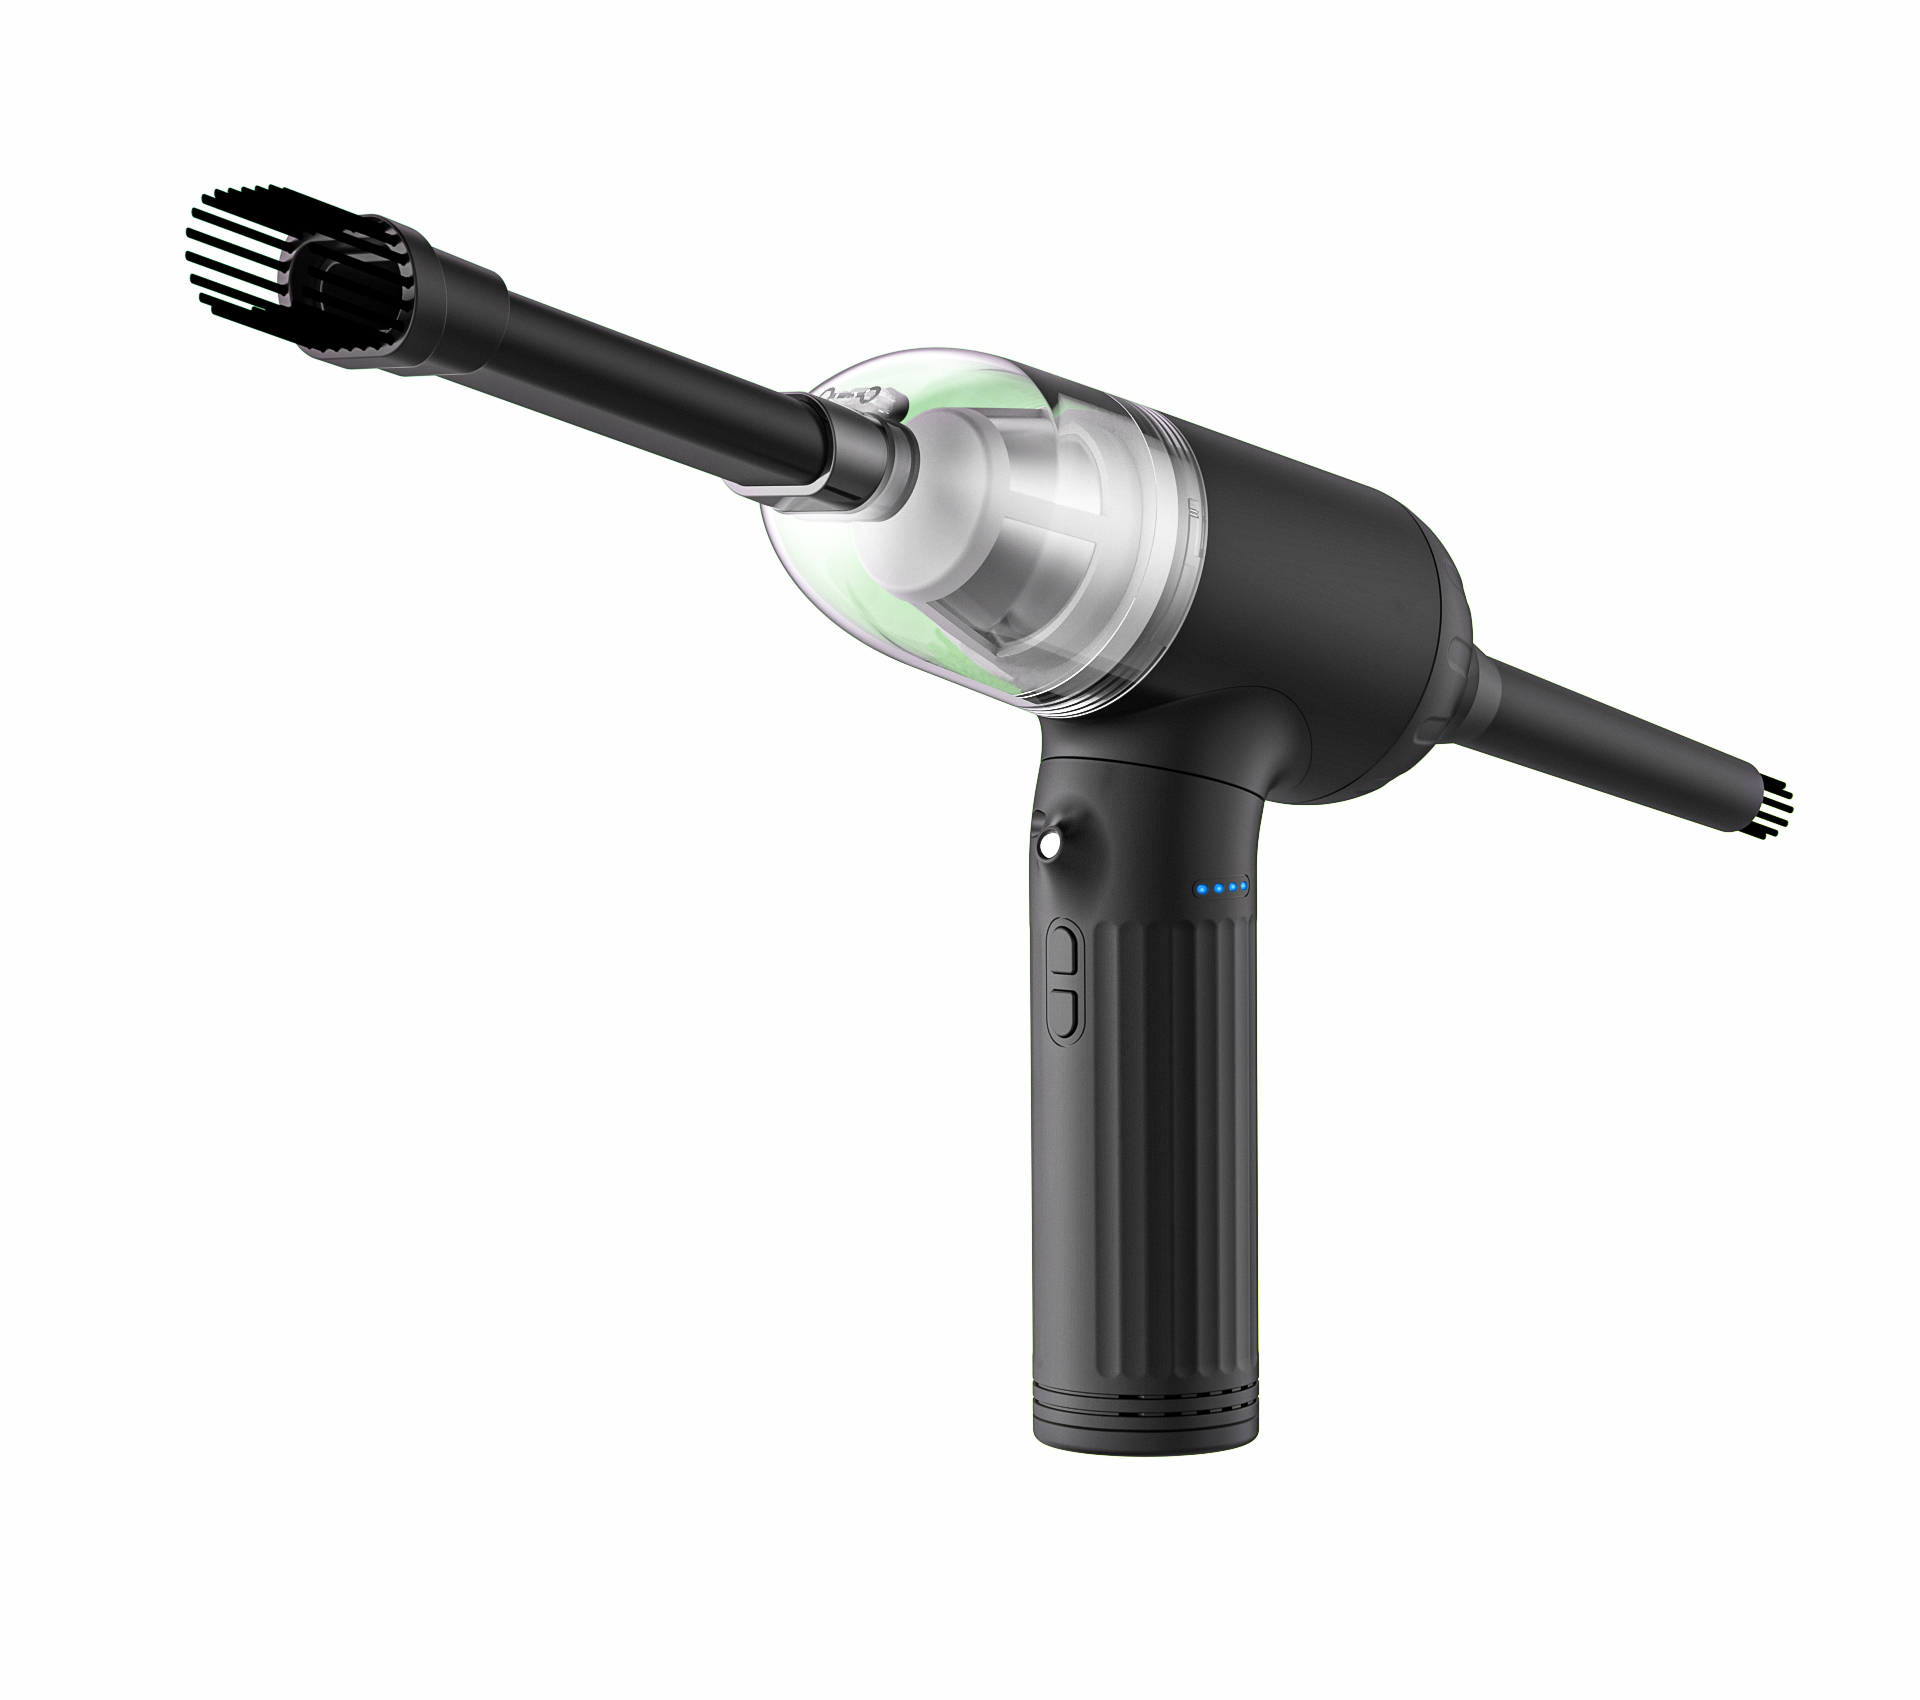 VC 16 handheld electric vacuum cleaners